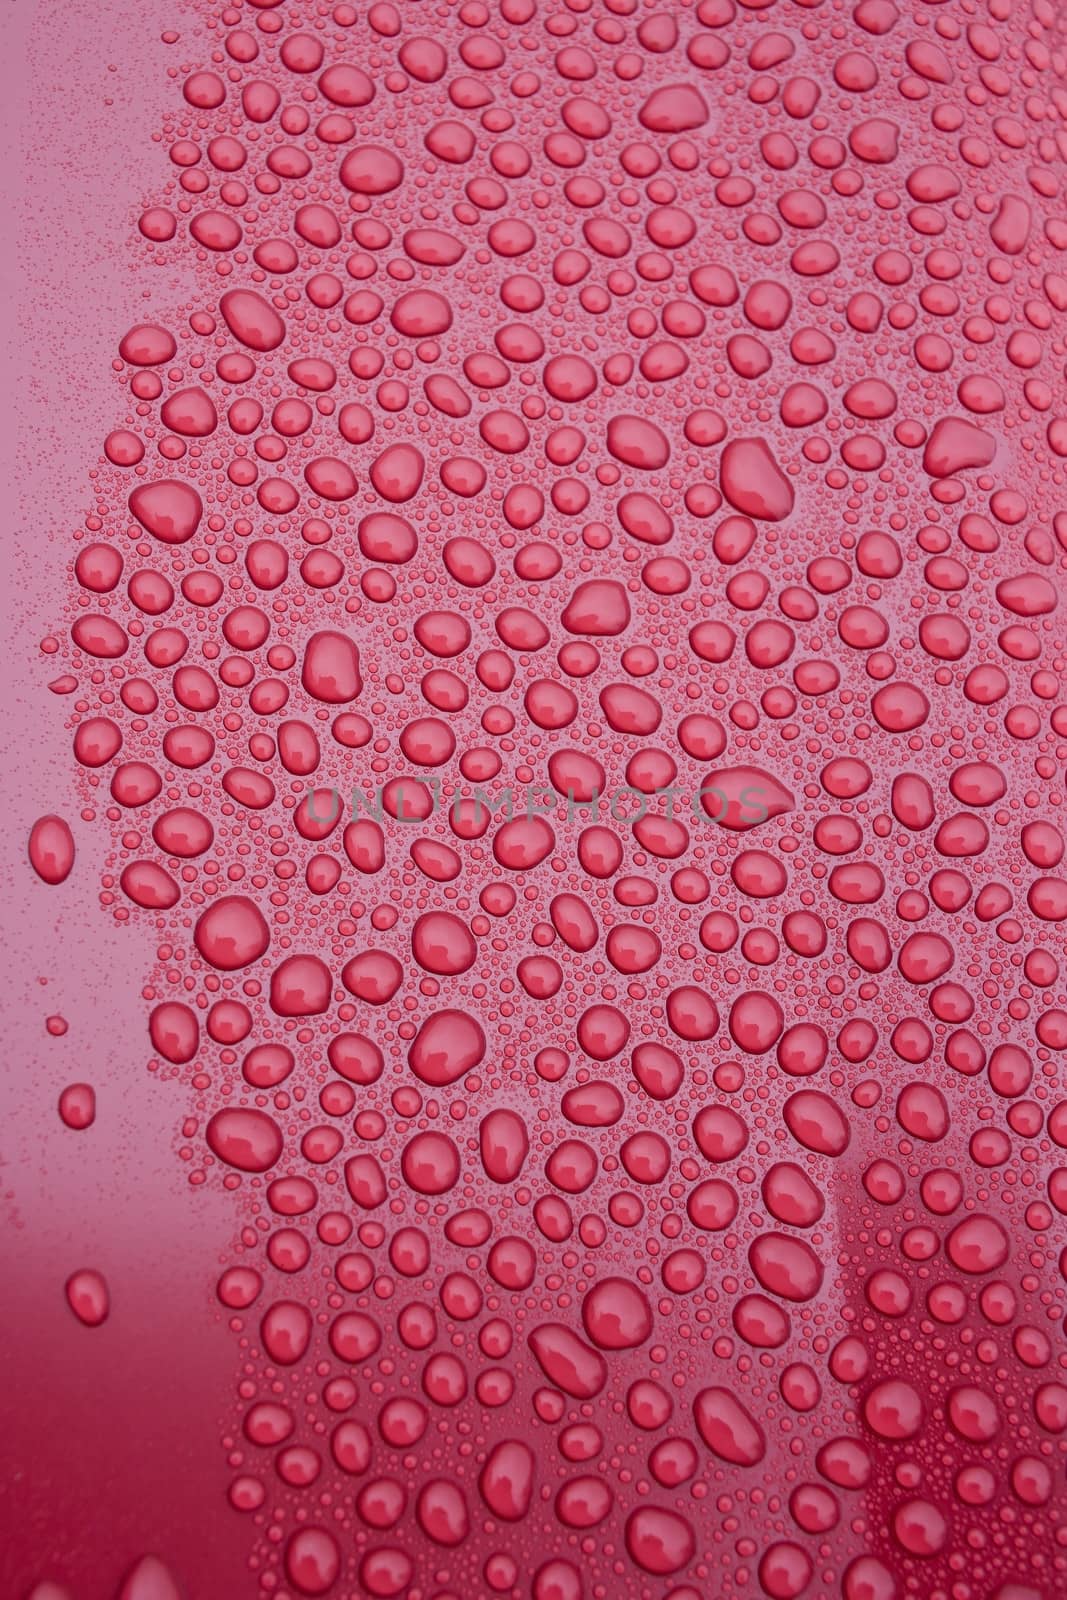 Abstraction in the form of water droplets of various sizes on a red background